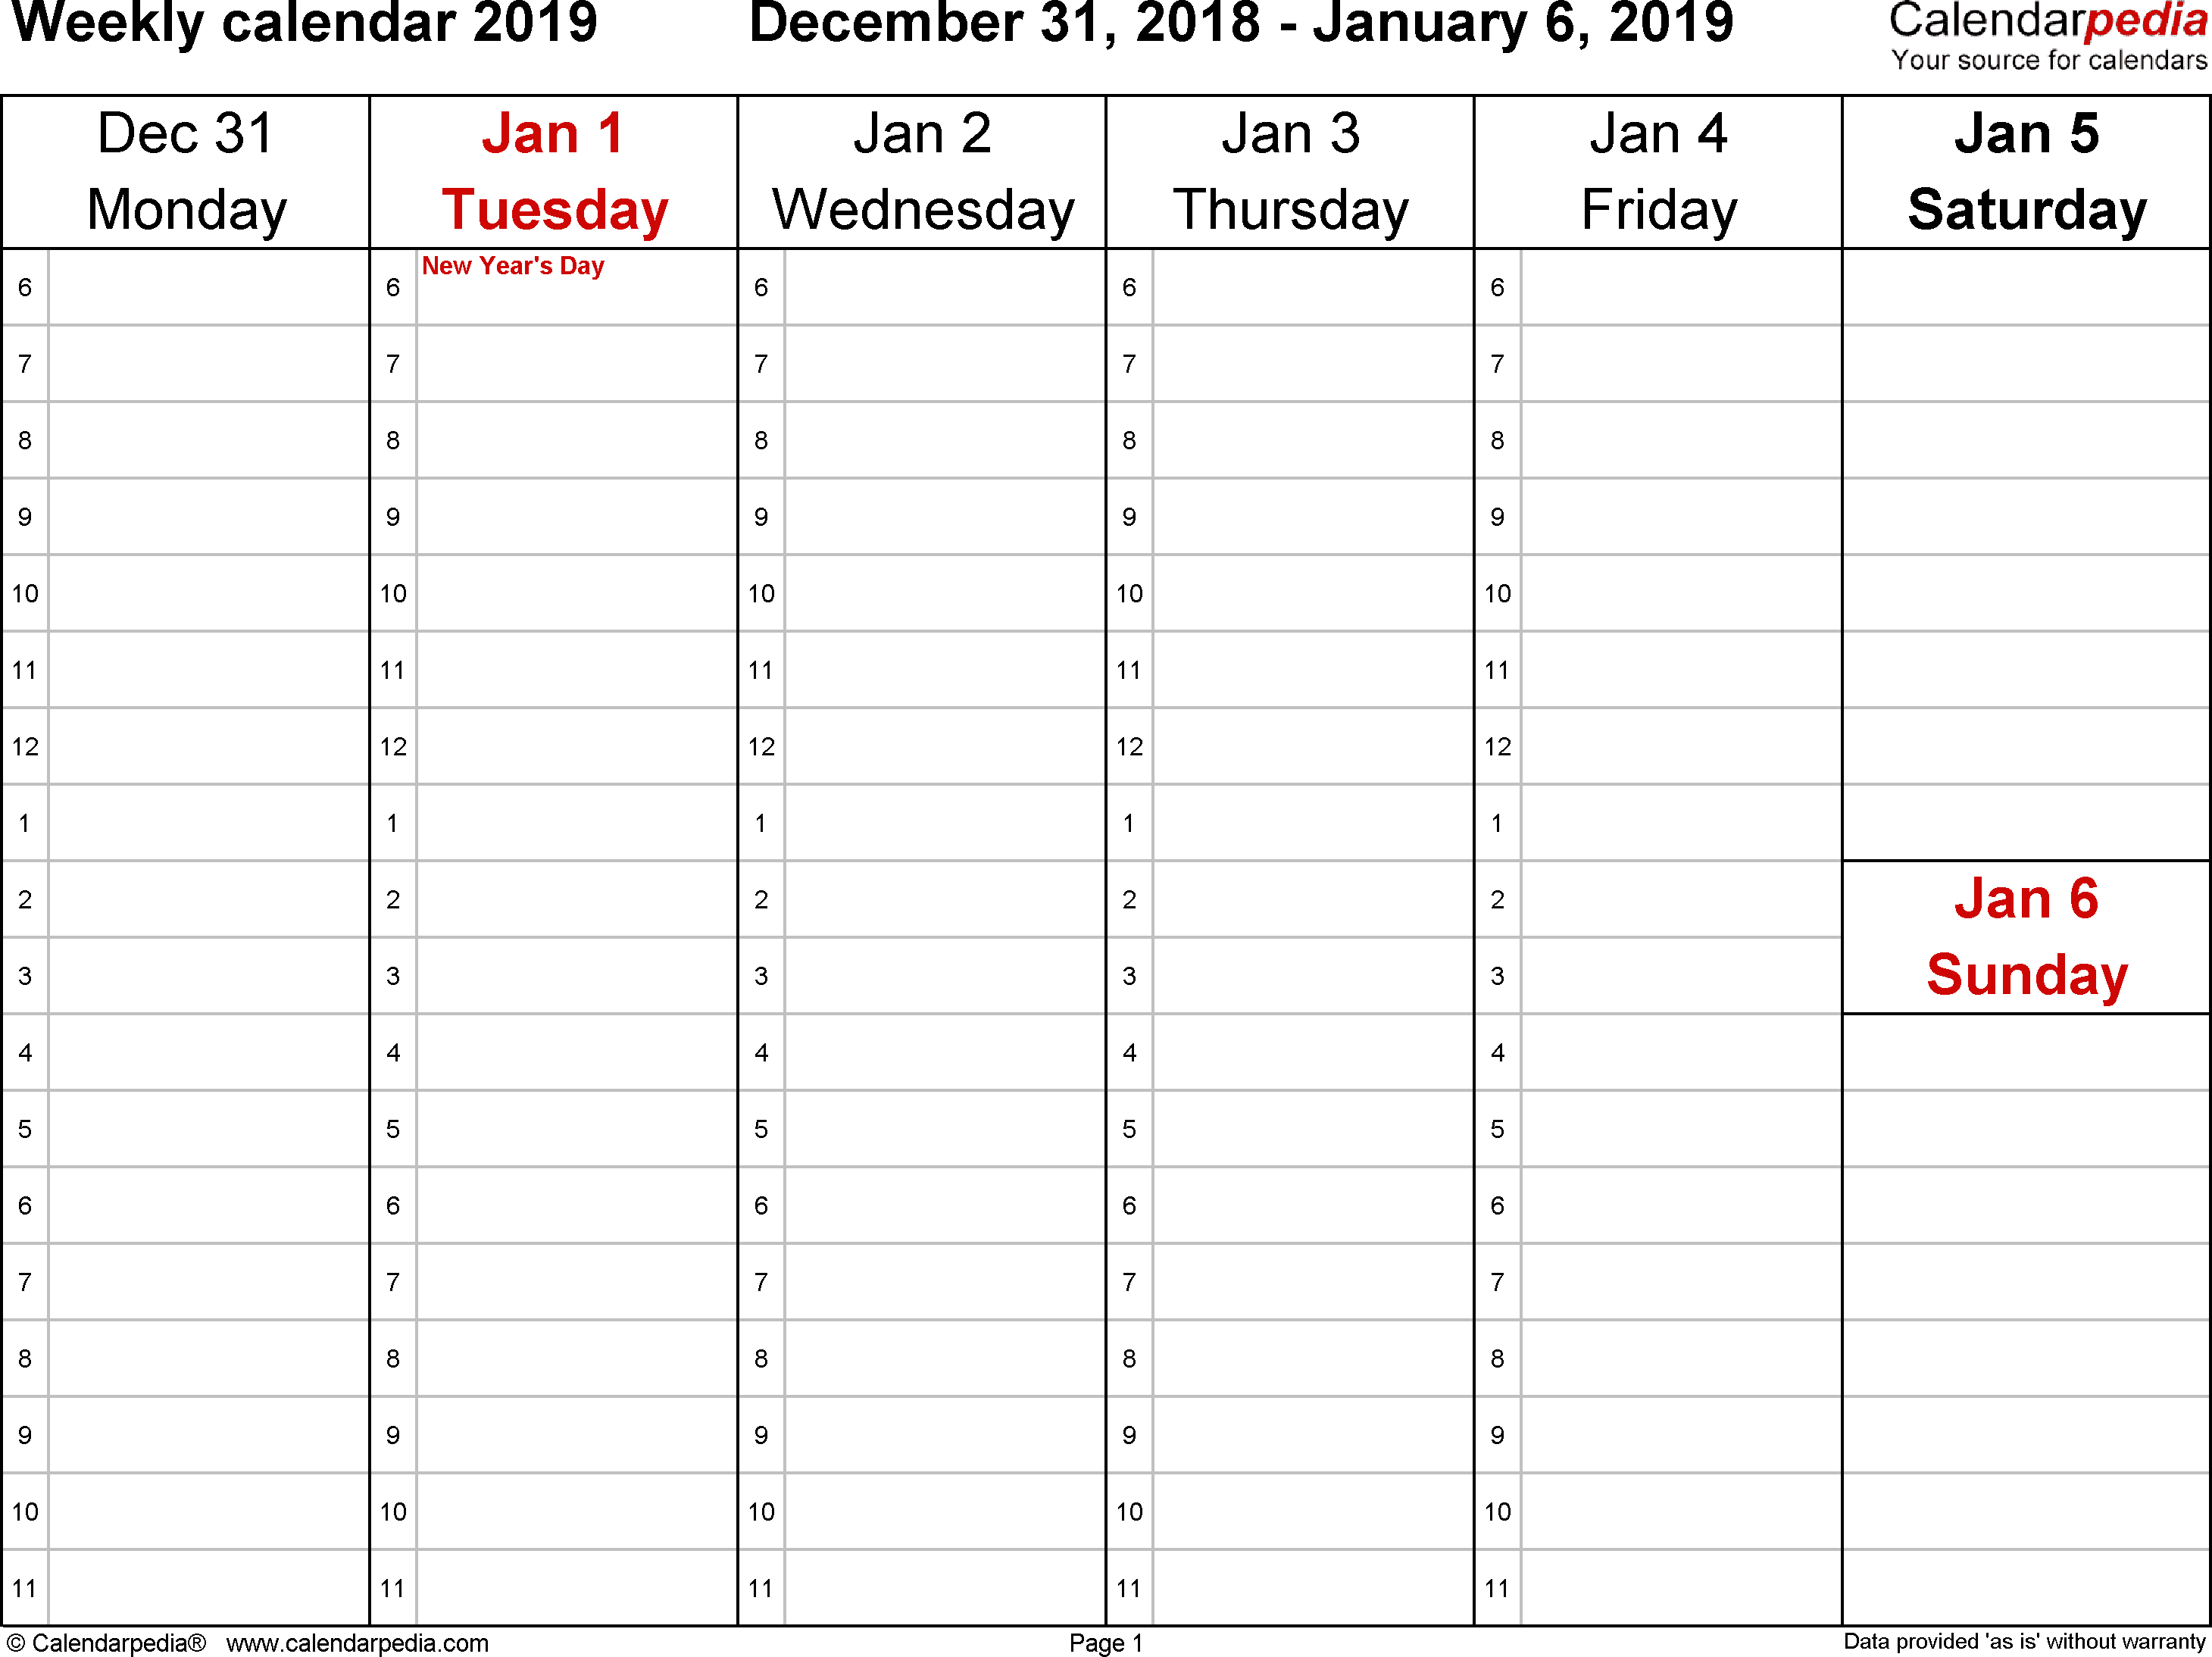 Weekly Calendar 2019 For Word - 12 Free Printable Templates